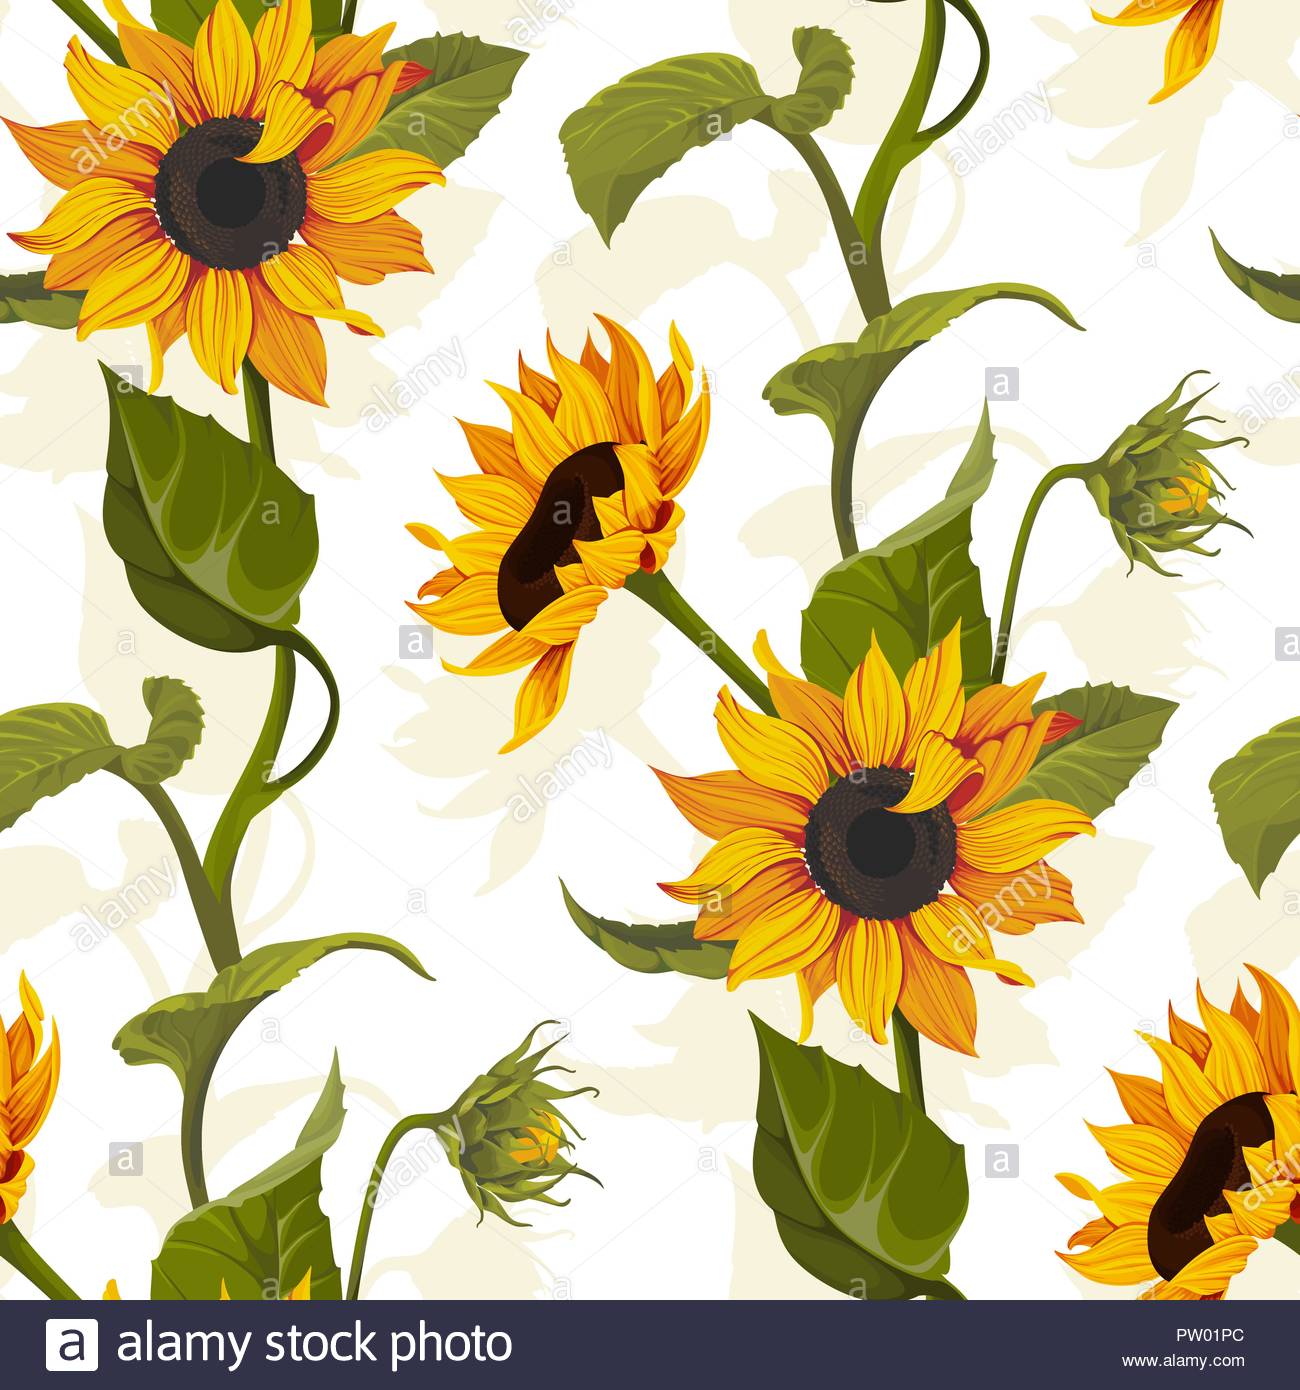 Sunflower Vector Seamless Pattern Floral Texture On Bright